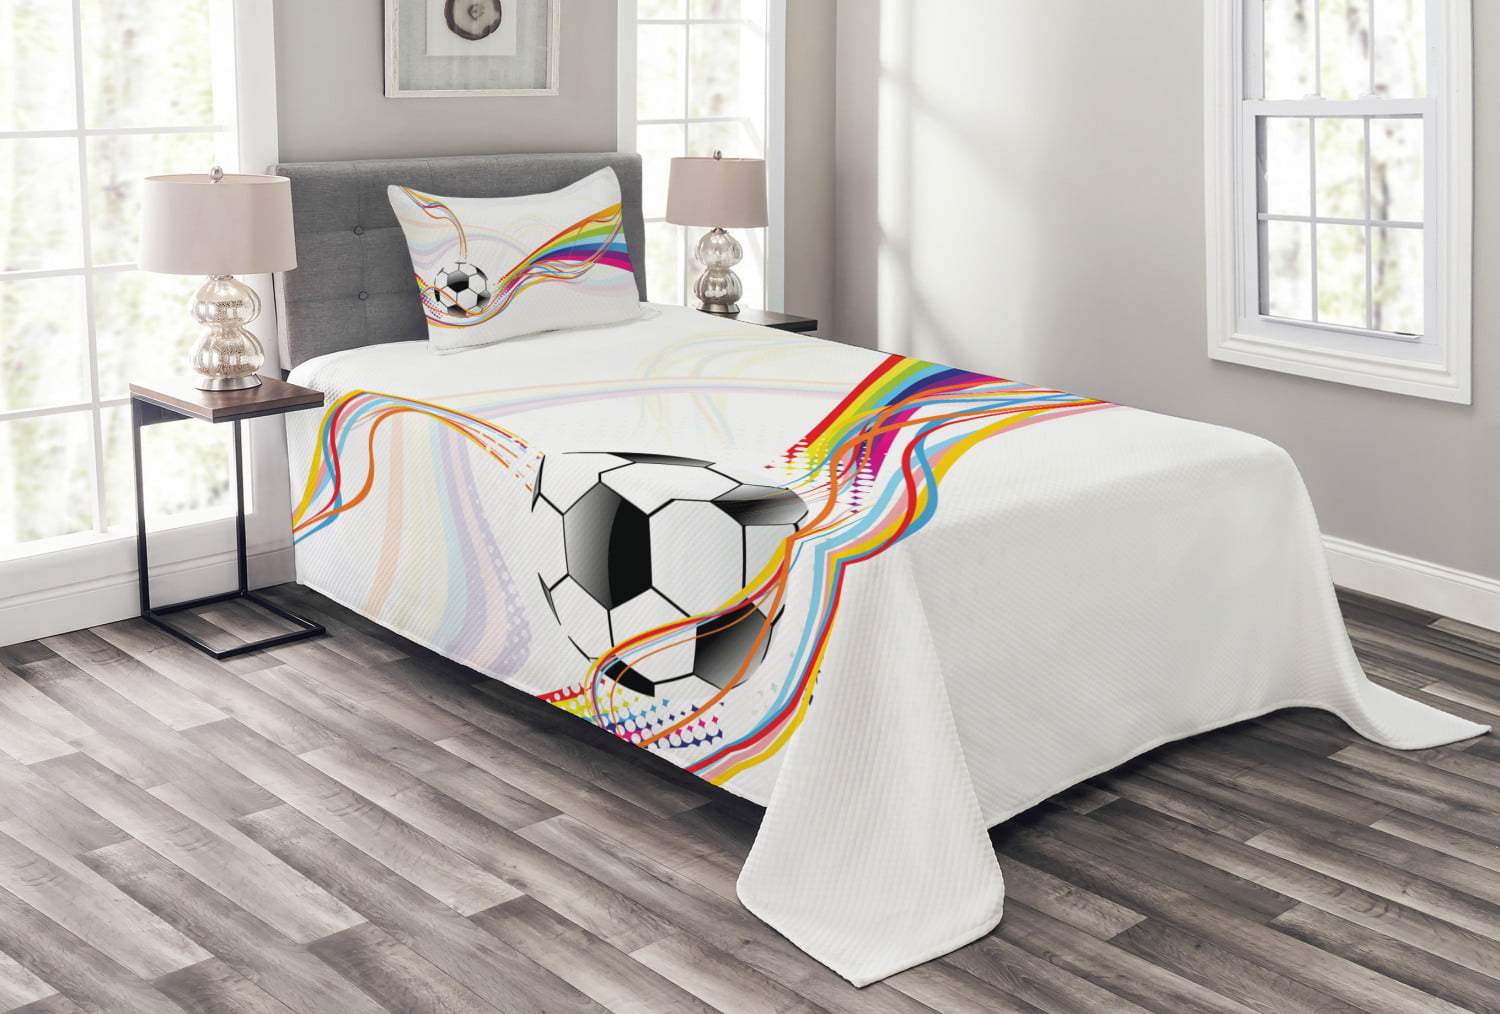 Soccer Bedspread Set Twin Size, Rainbow Patterned Swirled Lines Abstract  Football Pattern Colorful Stripes Design, Quilted Piece Decor Coverlet Set  with Pillow Sham, Multicolor, by Ambesonne